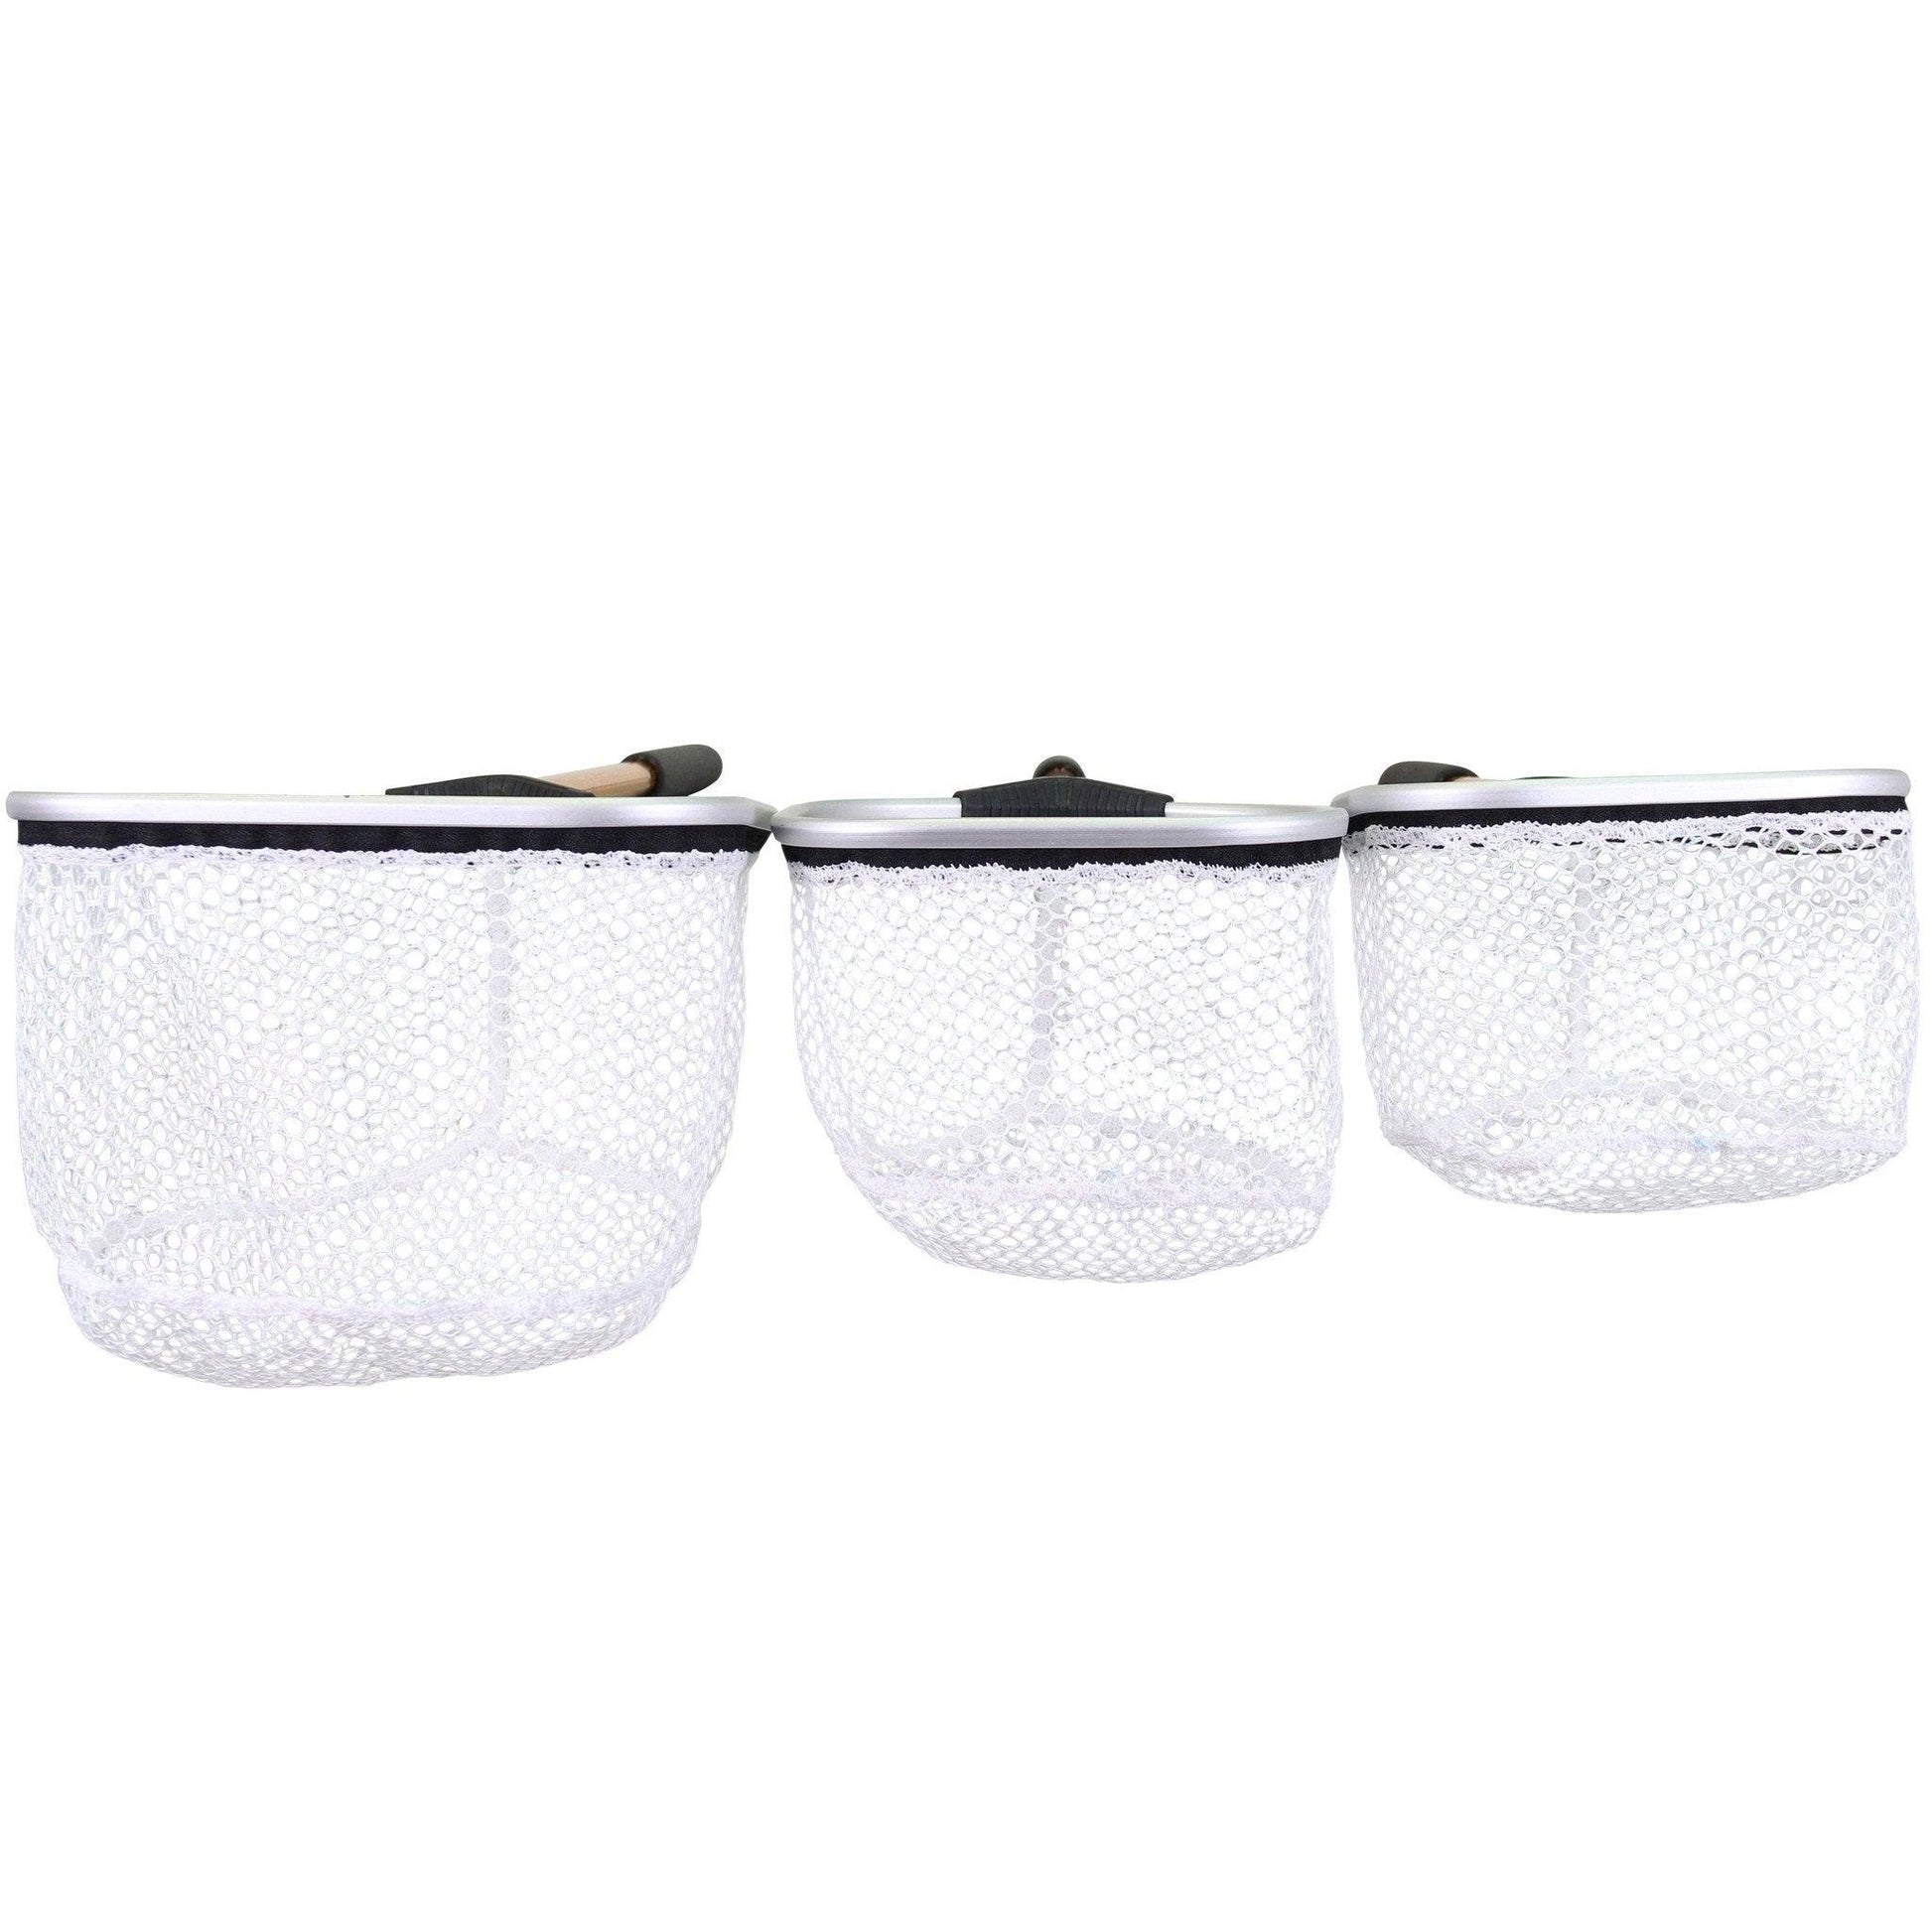 Accessories - Aftco - Gold Series Bait Nets - The Fishermans Hut